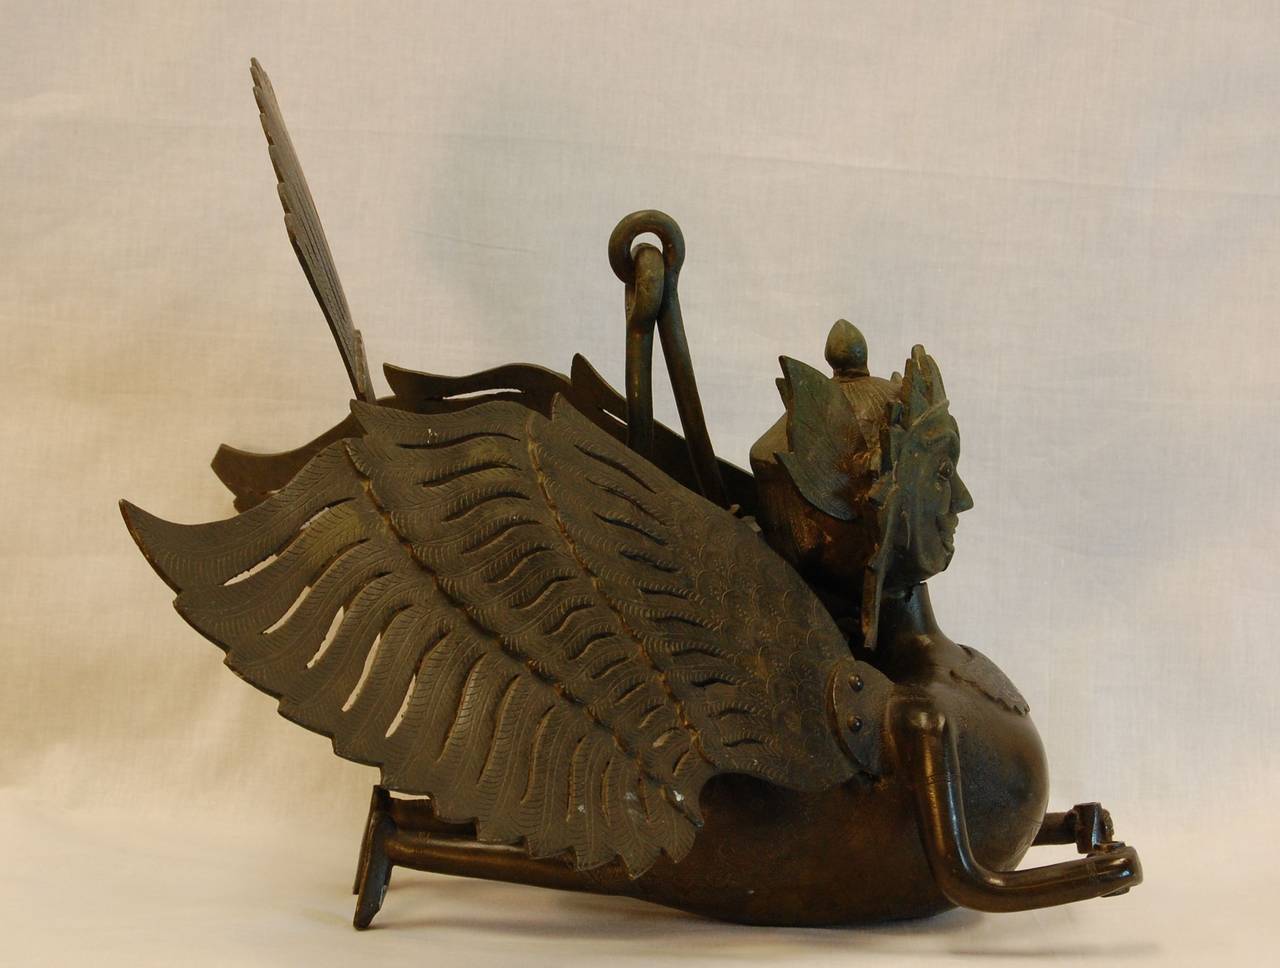 Large, heavy, hanging incense burner in form of ancient Garuda Figure. A very ornate and finely etched figure. Origin and exact age unknown. Purchased in 1962 from Madame Ray Paioss of Old Versaille Antiques in New York City.